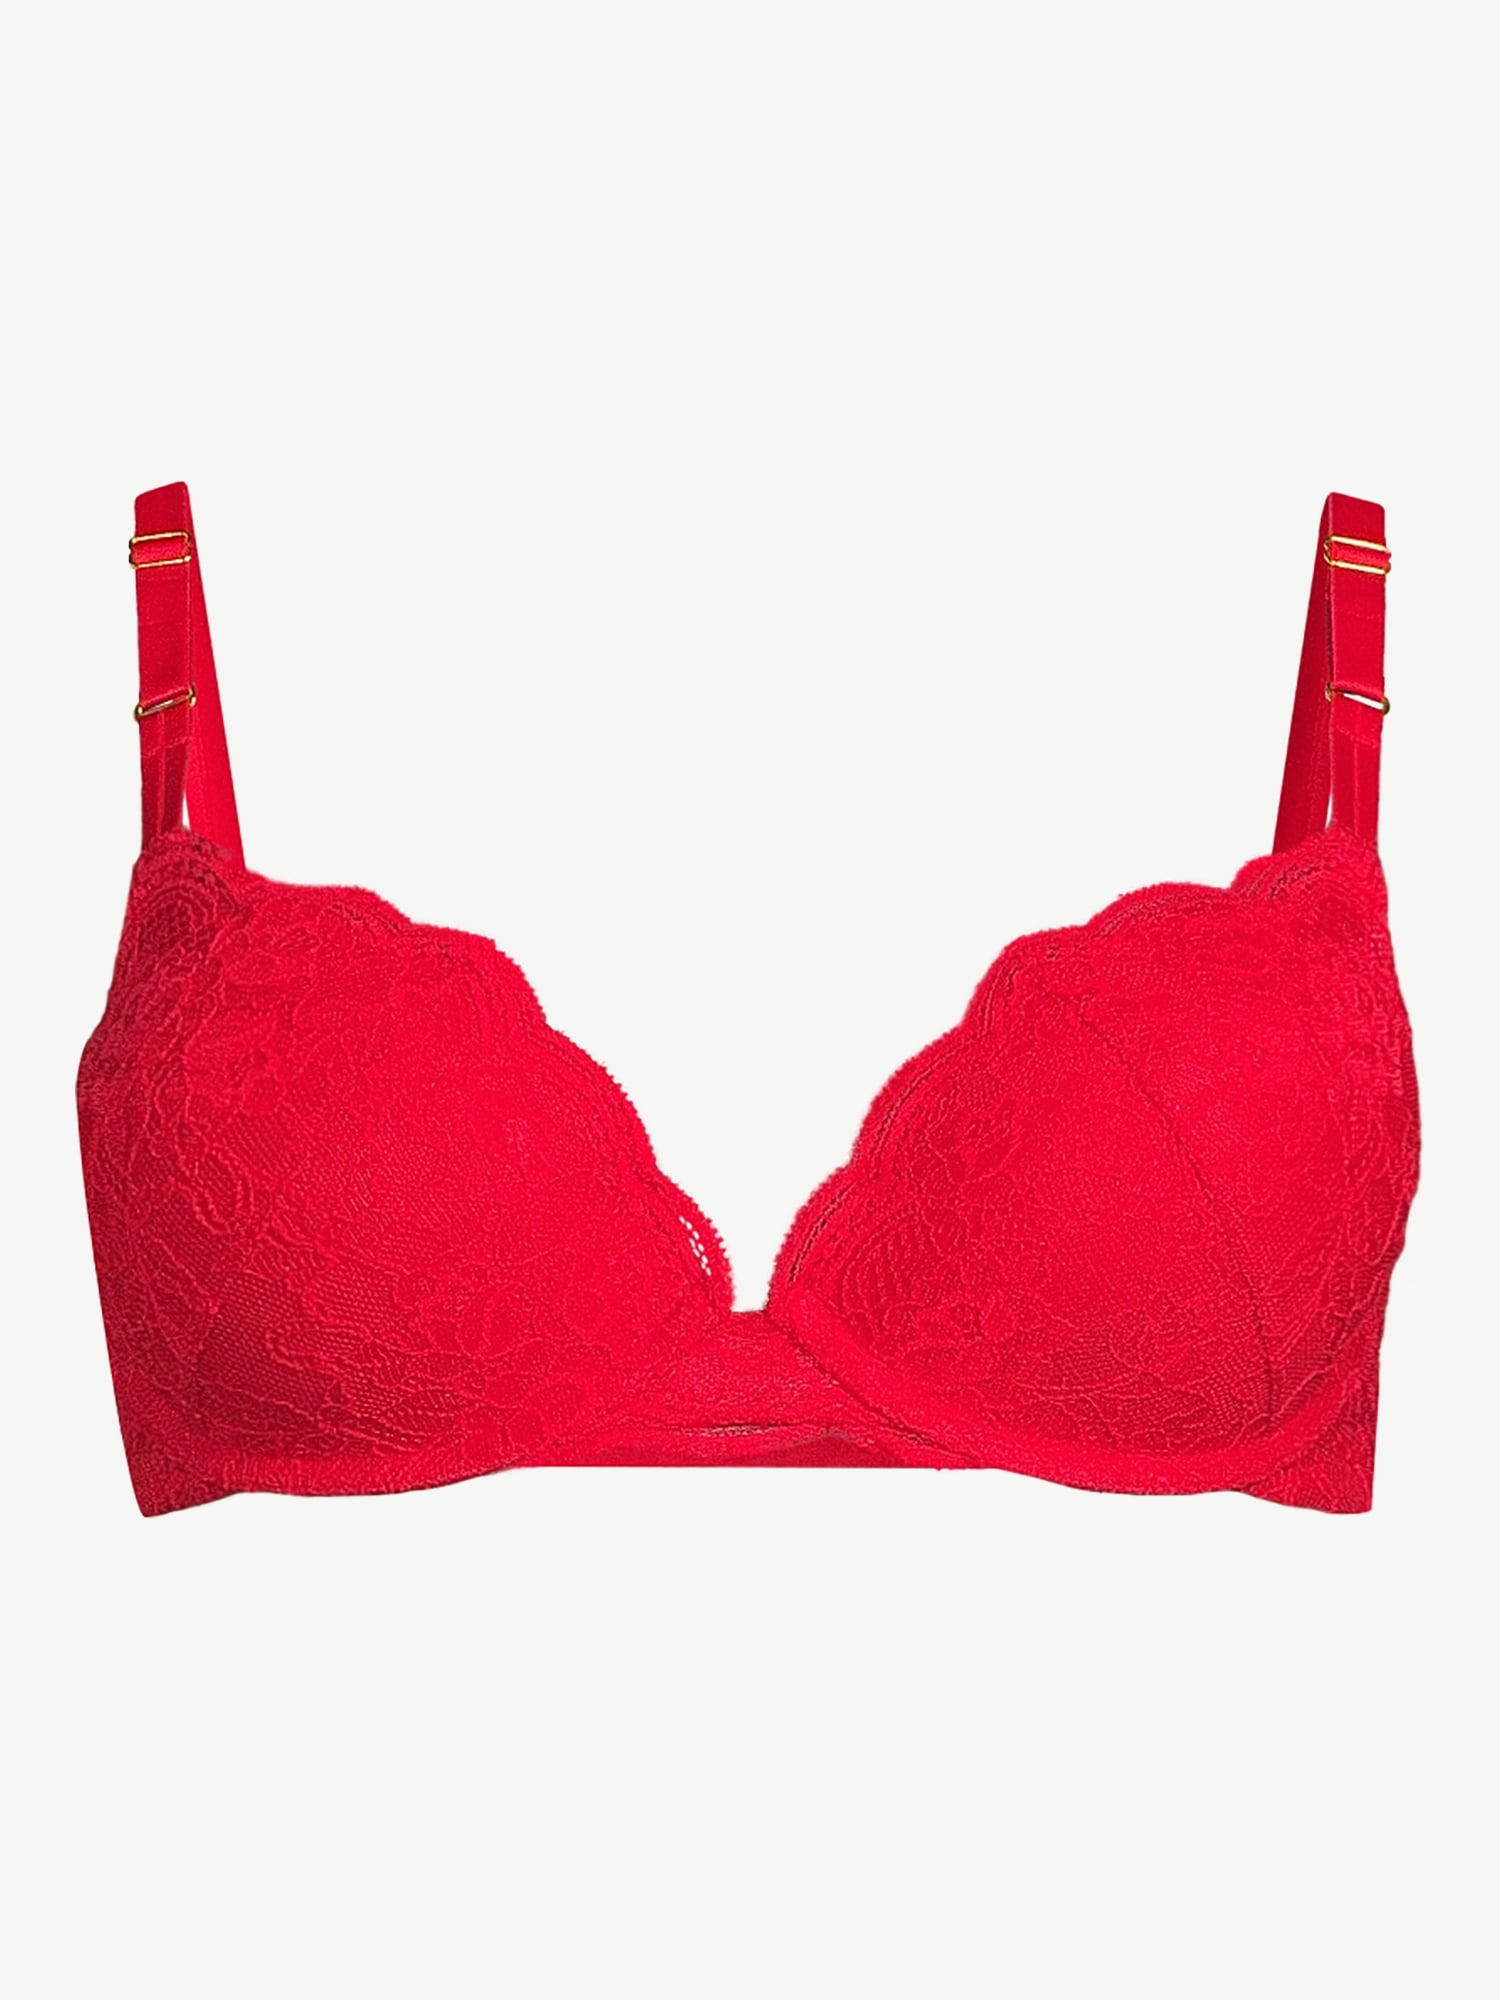 LADY DIAMOND SHOP on X: Sexy Cotton Bras Women Wire Free Comfortable Push  Up Bra Size 36 38 40 42 44 46 B C D Cup Female Soft Underwere #jeans #polo  #inspiration #